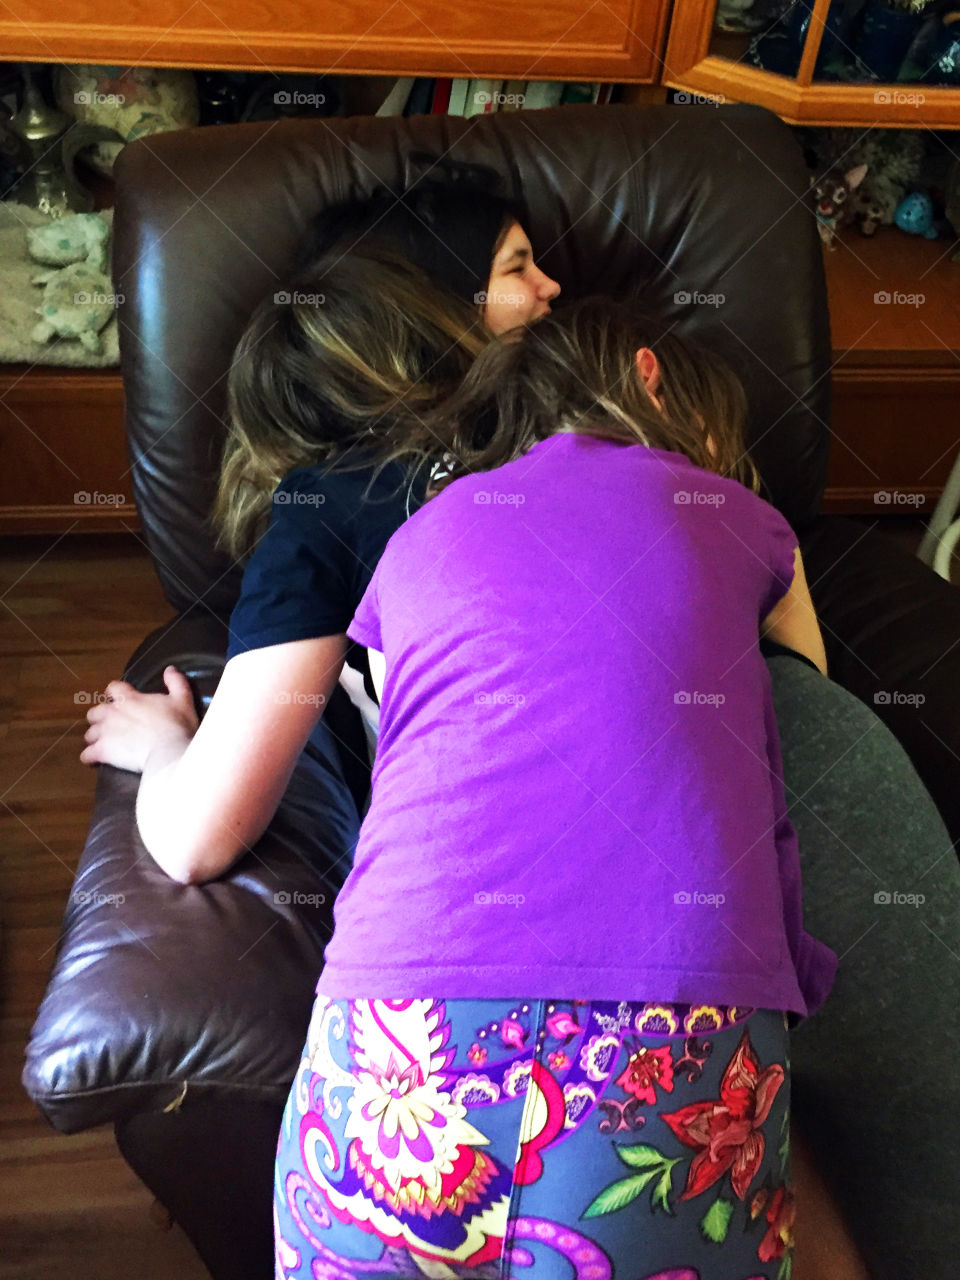 My favourite room in the house is the room where there is the most interaction with my family; my open kitchen -family room. Here my three girls are piling on each other to give big loving bear hugs to each other.  Home is where the heart is! ❤️